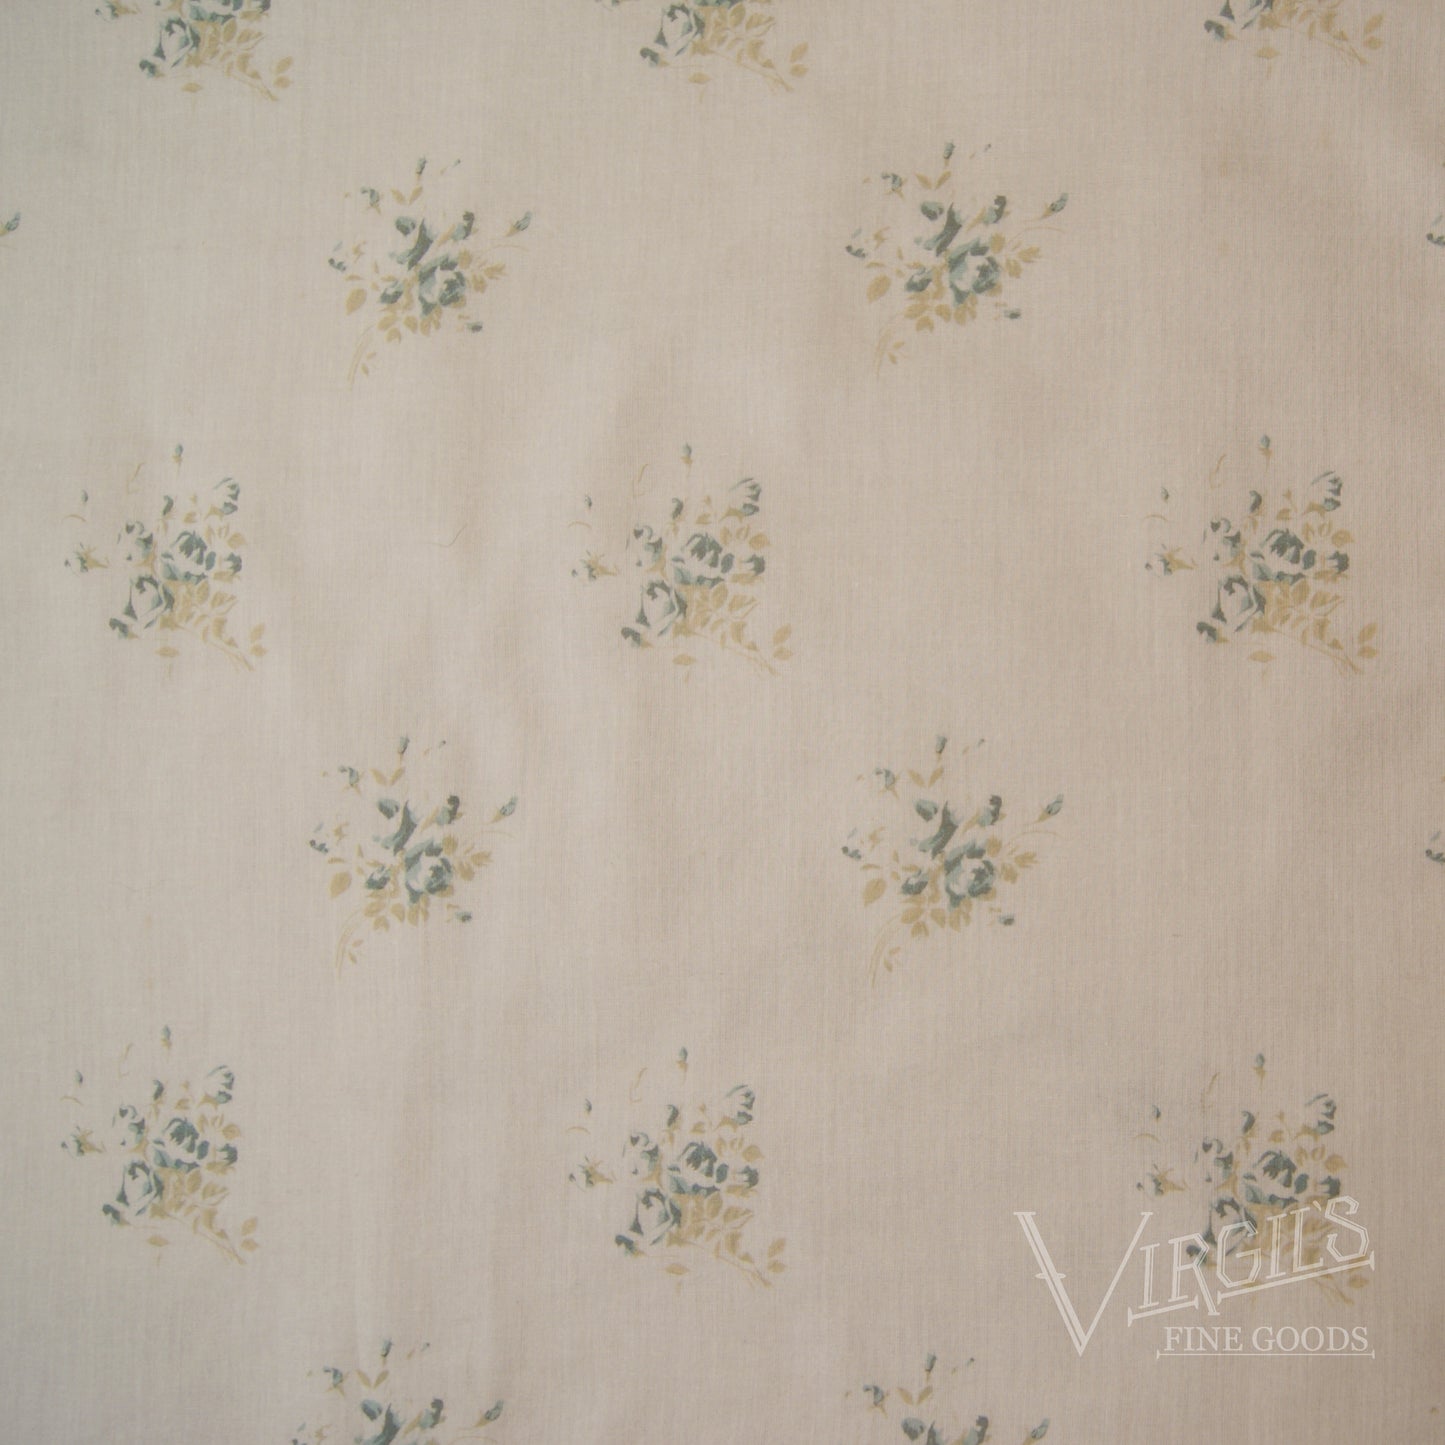 Diana Roses in Dusty Blue (ca1900-1915) Direct Reproduction Cotton/Silk Voile Fabric